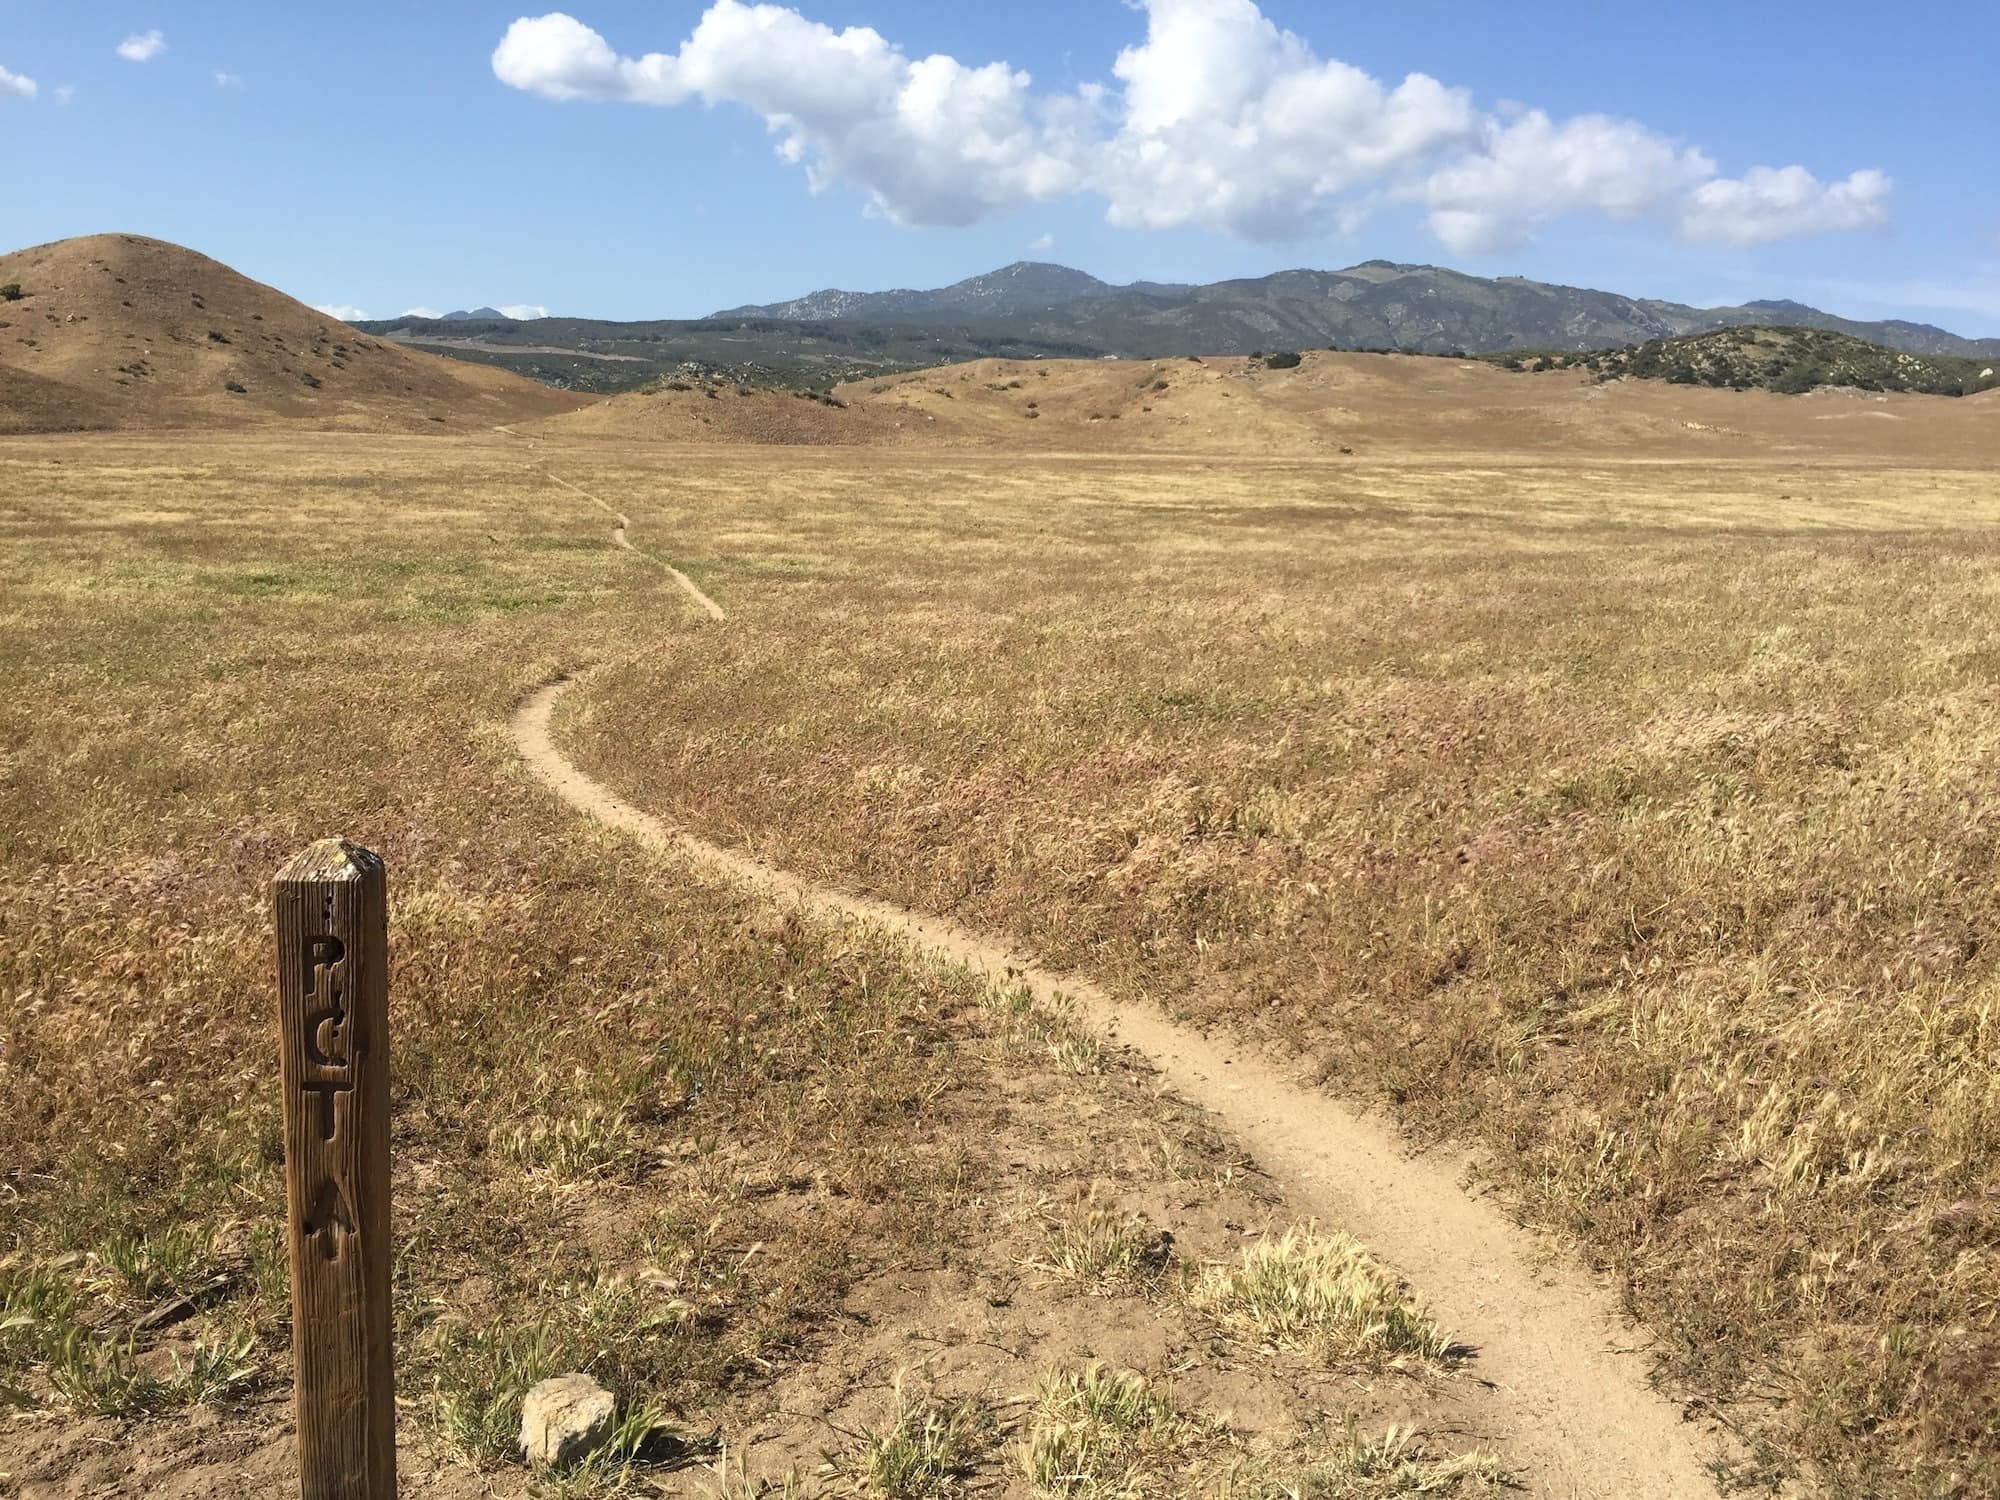 Thinking about thru-hiking the PCT? Check out these 20 Pacific Crest Trail photos and the story behind them from a girl who solo-hiked the PCT.